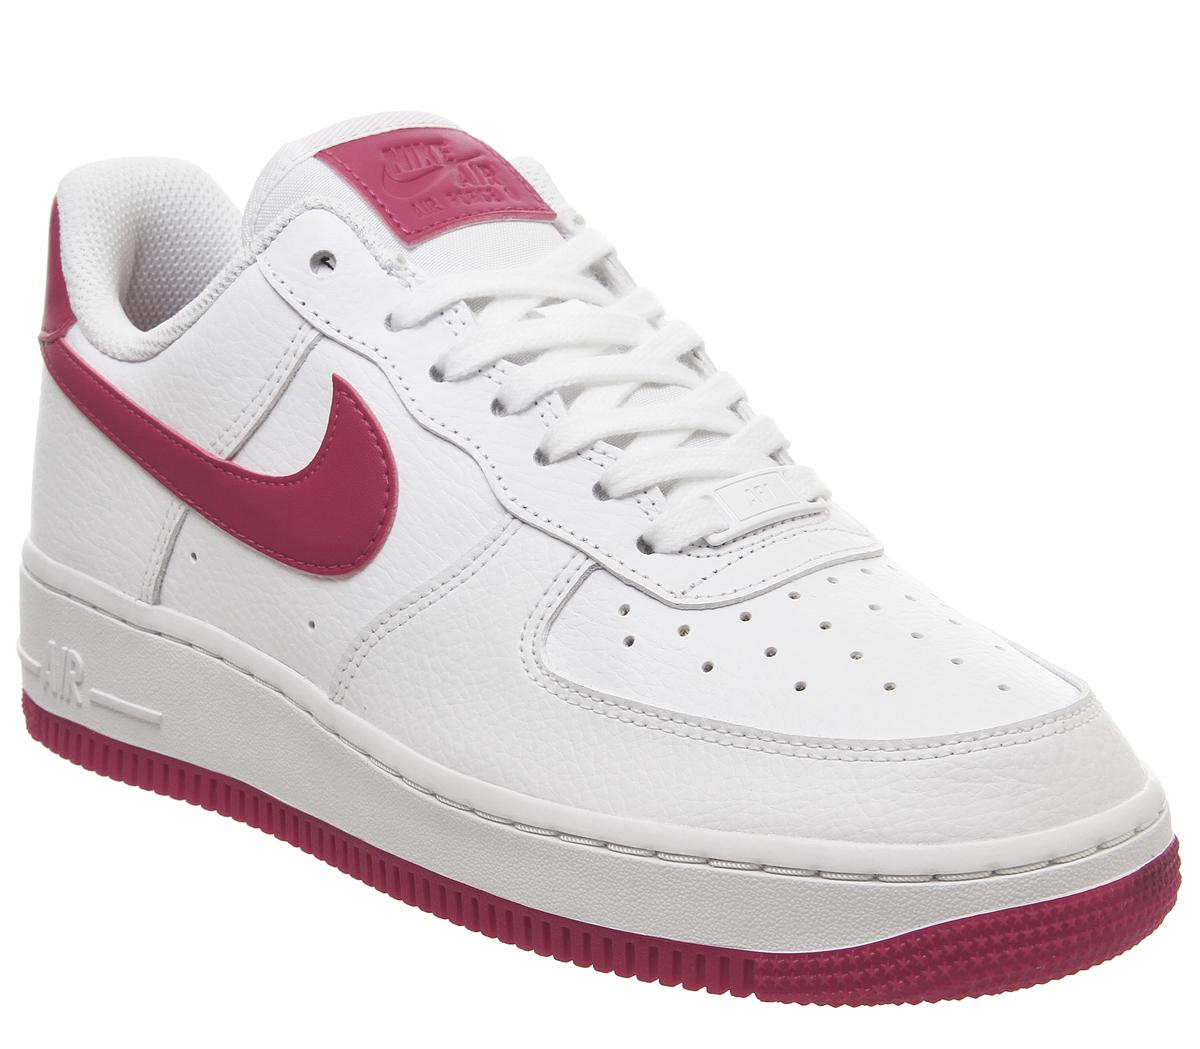 nike air force with cherries